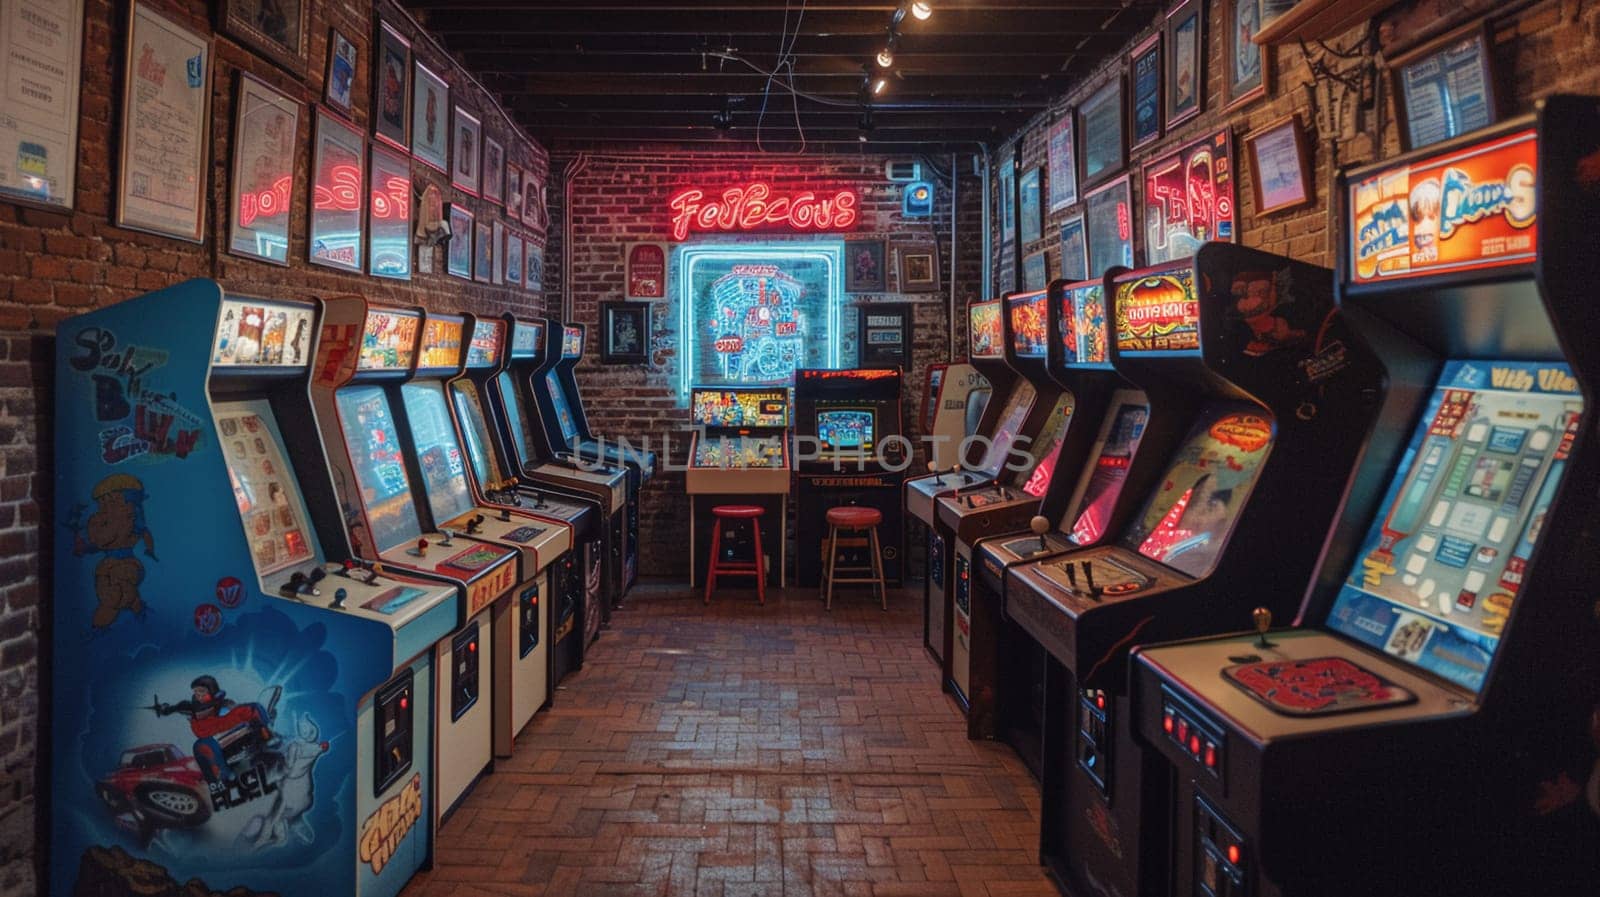 Retro game room with vintage arcade machines and a neon sign